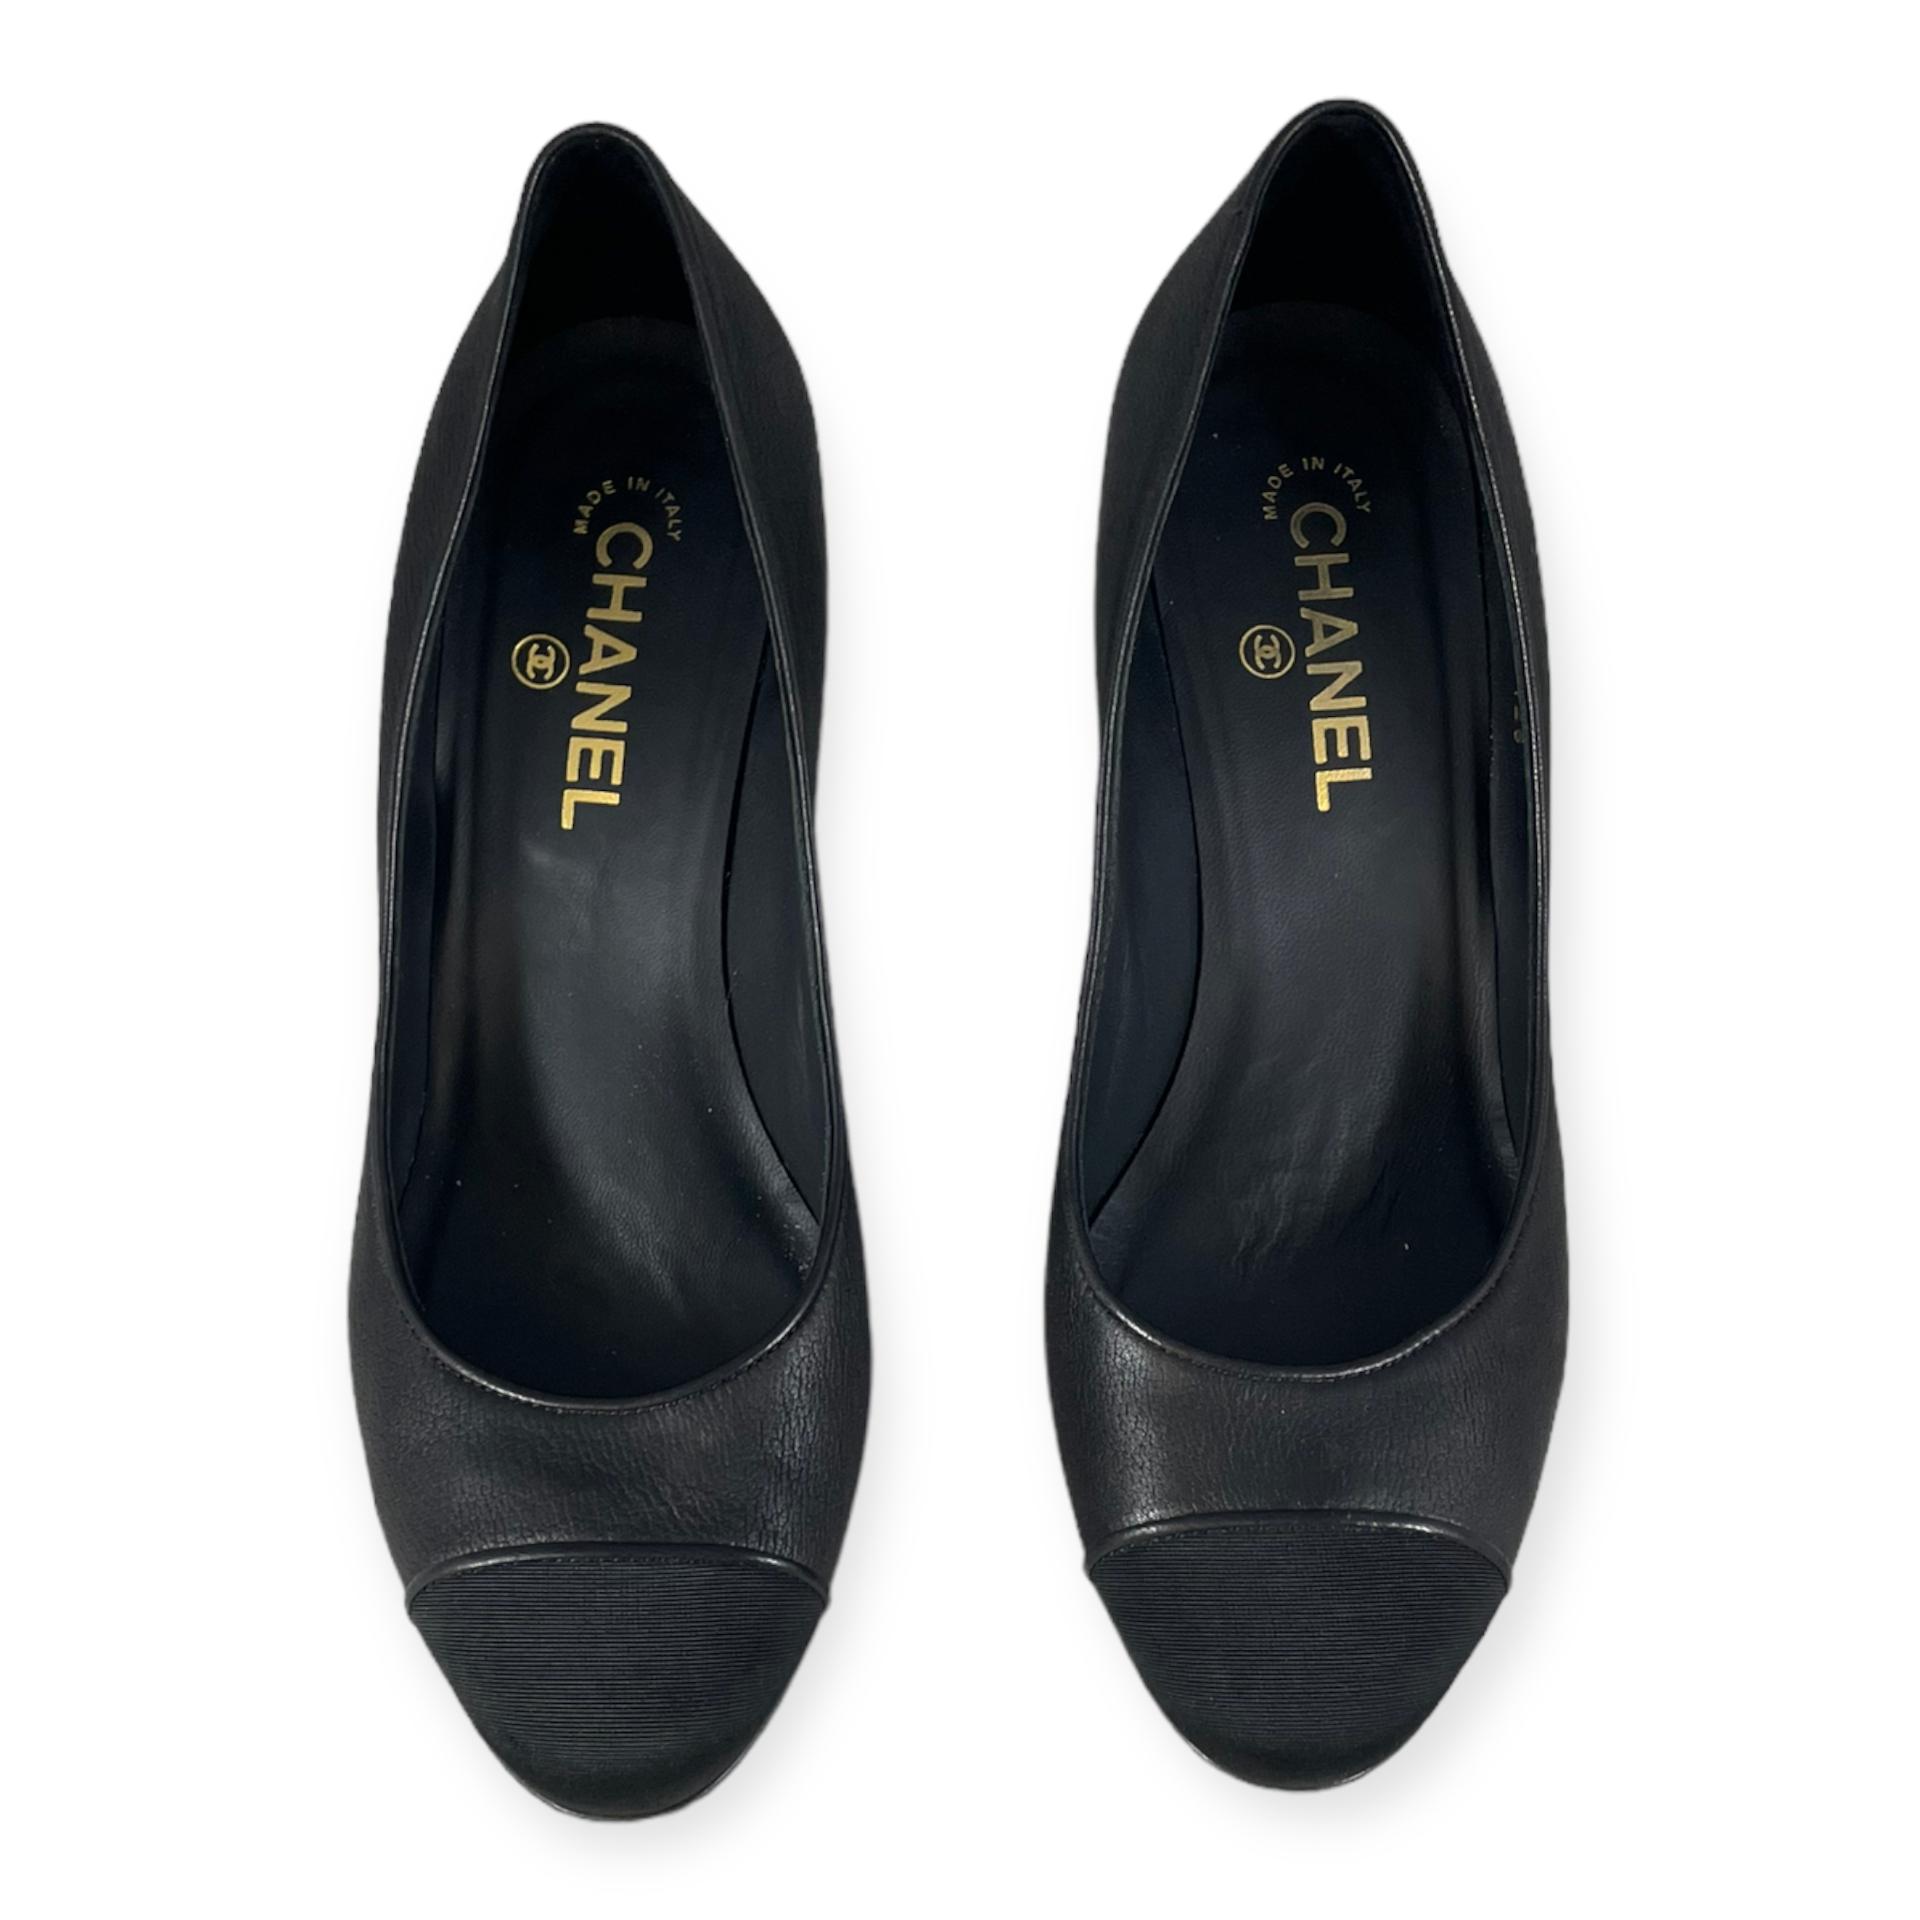 Chanel Black/Gold Leather CC Ballet Flats Size 40.5 Chanel